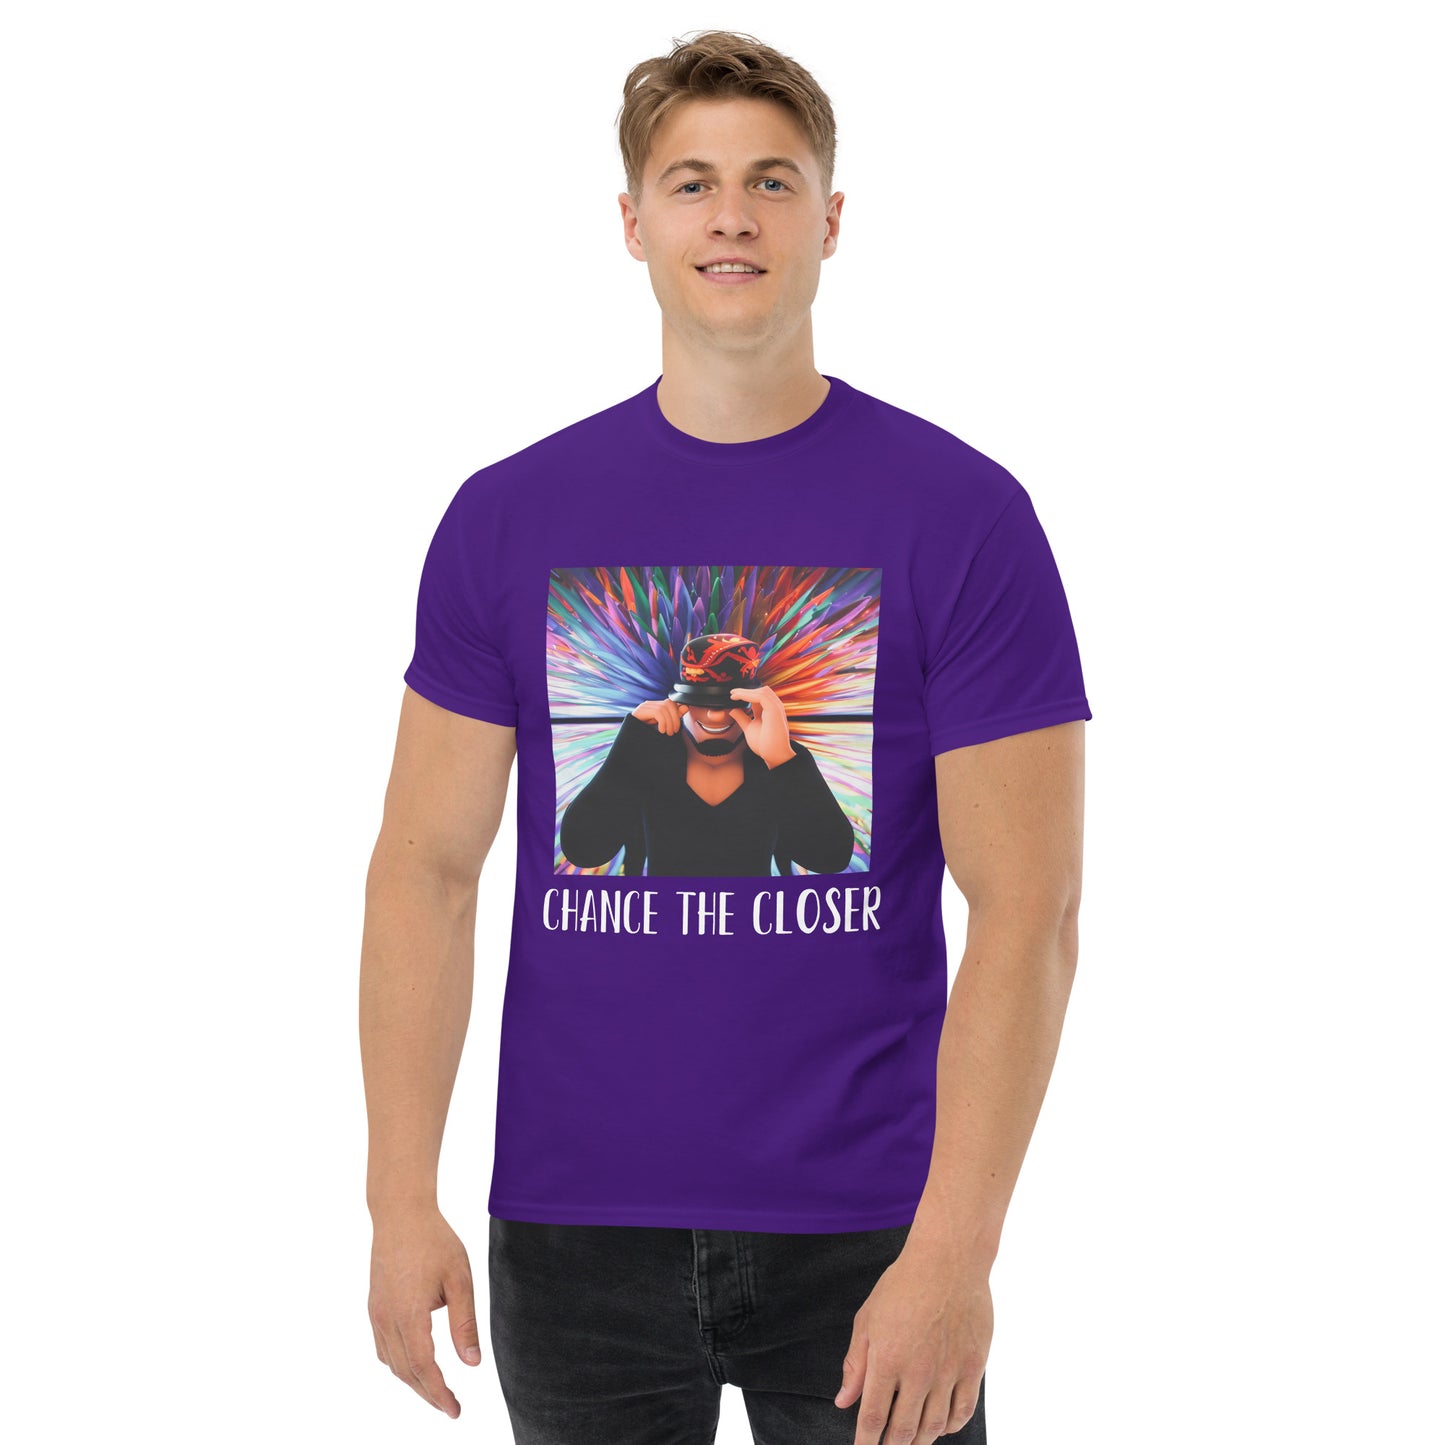 Chance the Closer Graphic tee